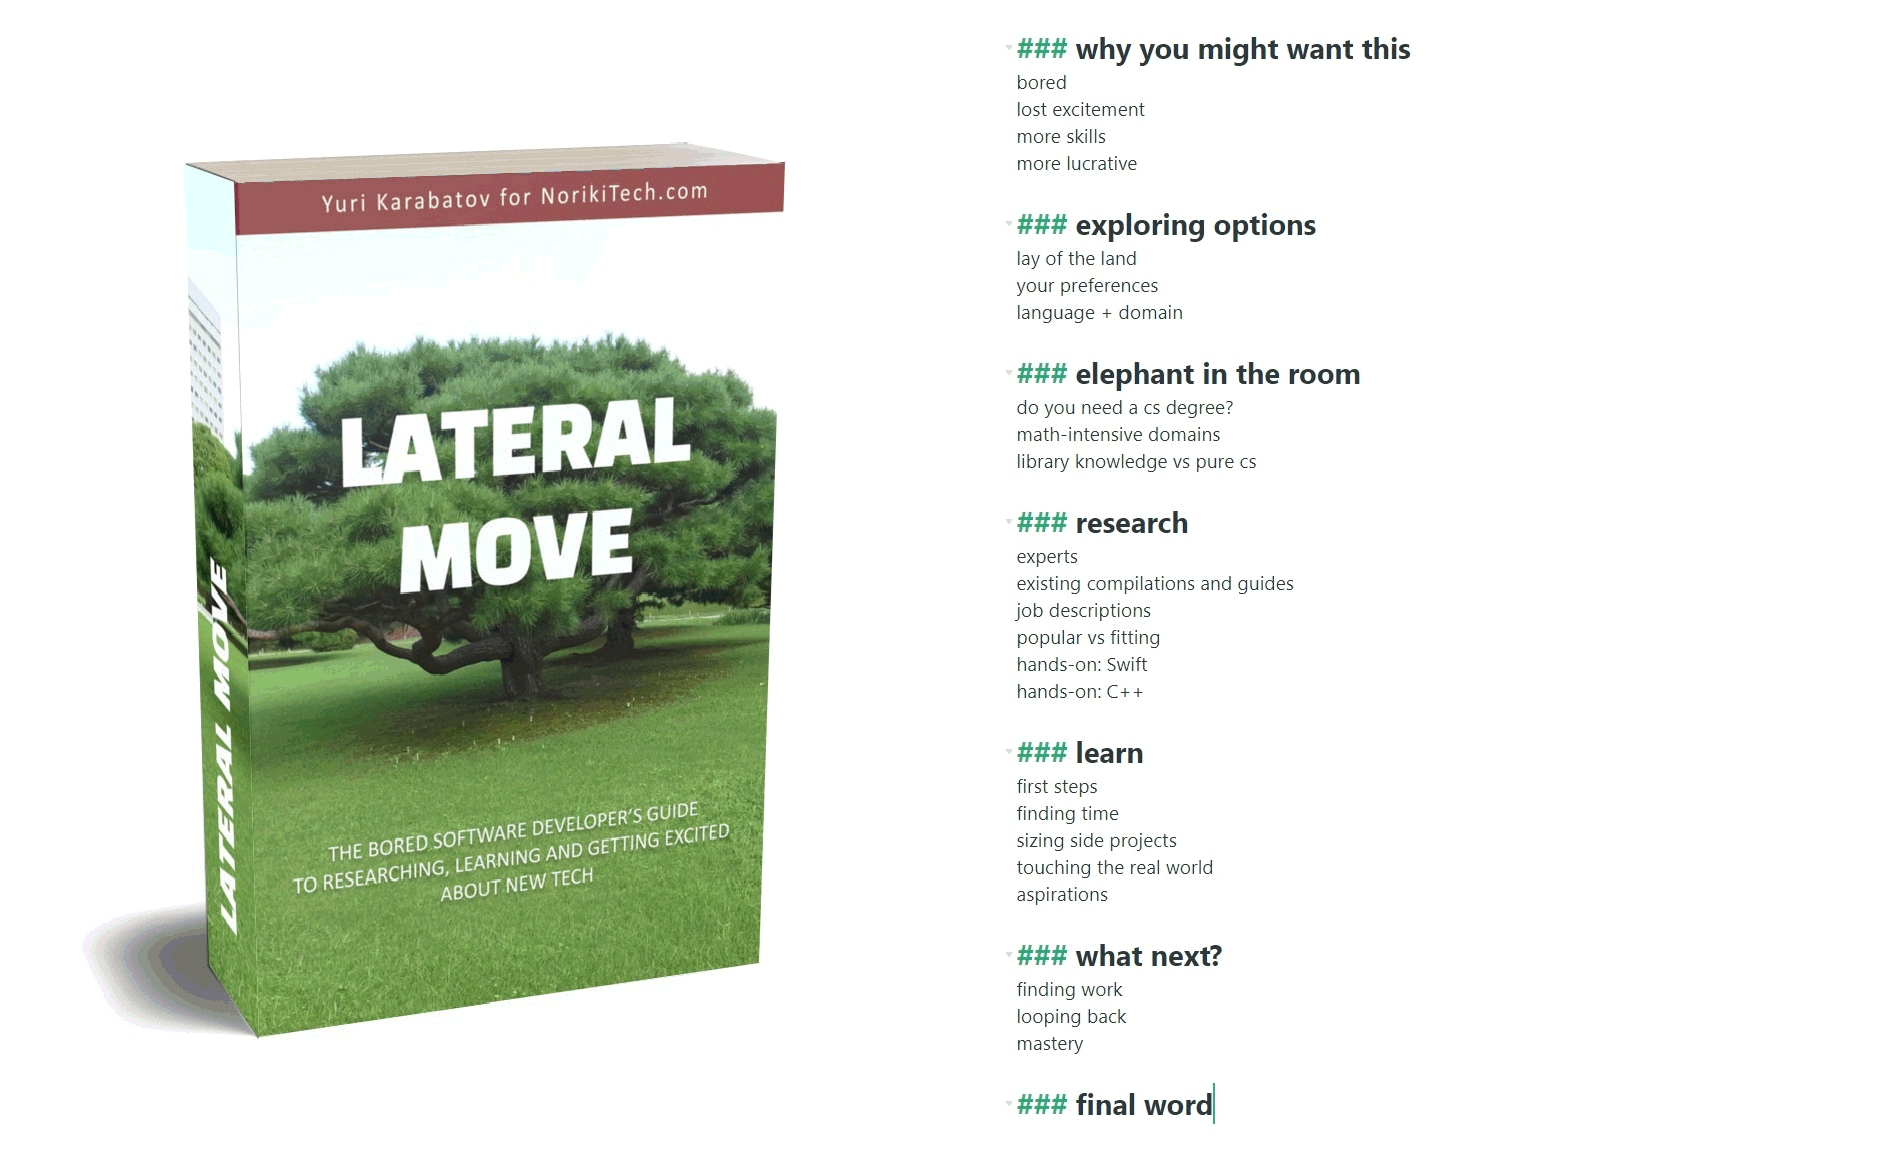 “Lateral Move” cover and table of contents